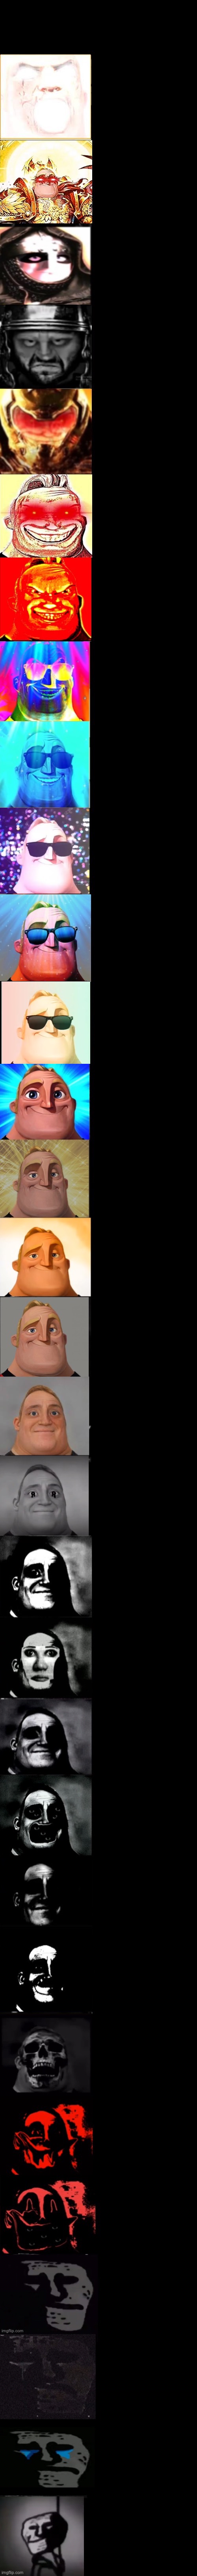 Mr Incredible becoming Uncanny (EXTENDED Template) by D4ni3l001 on